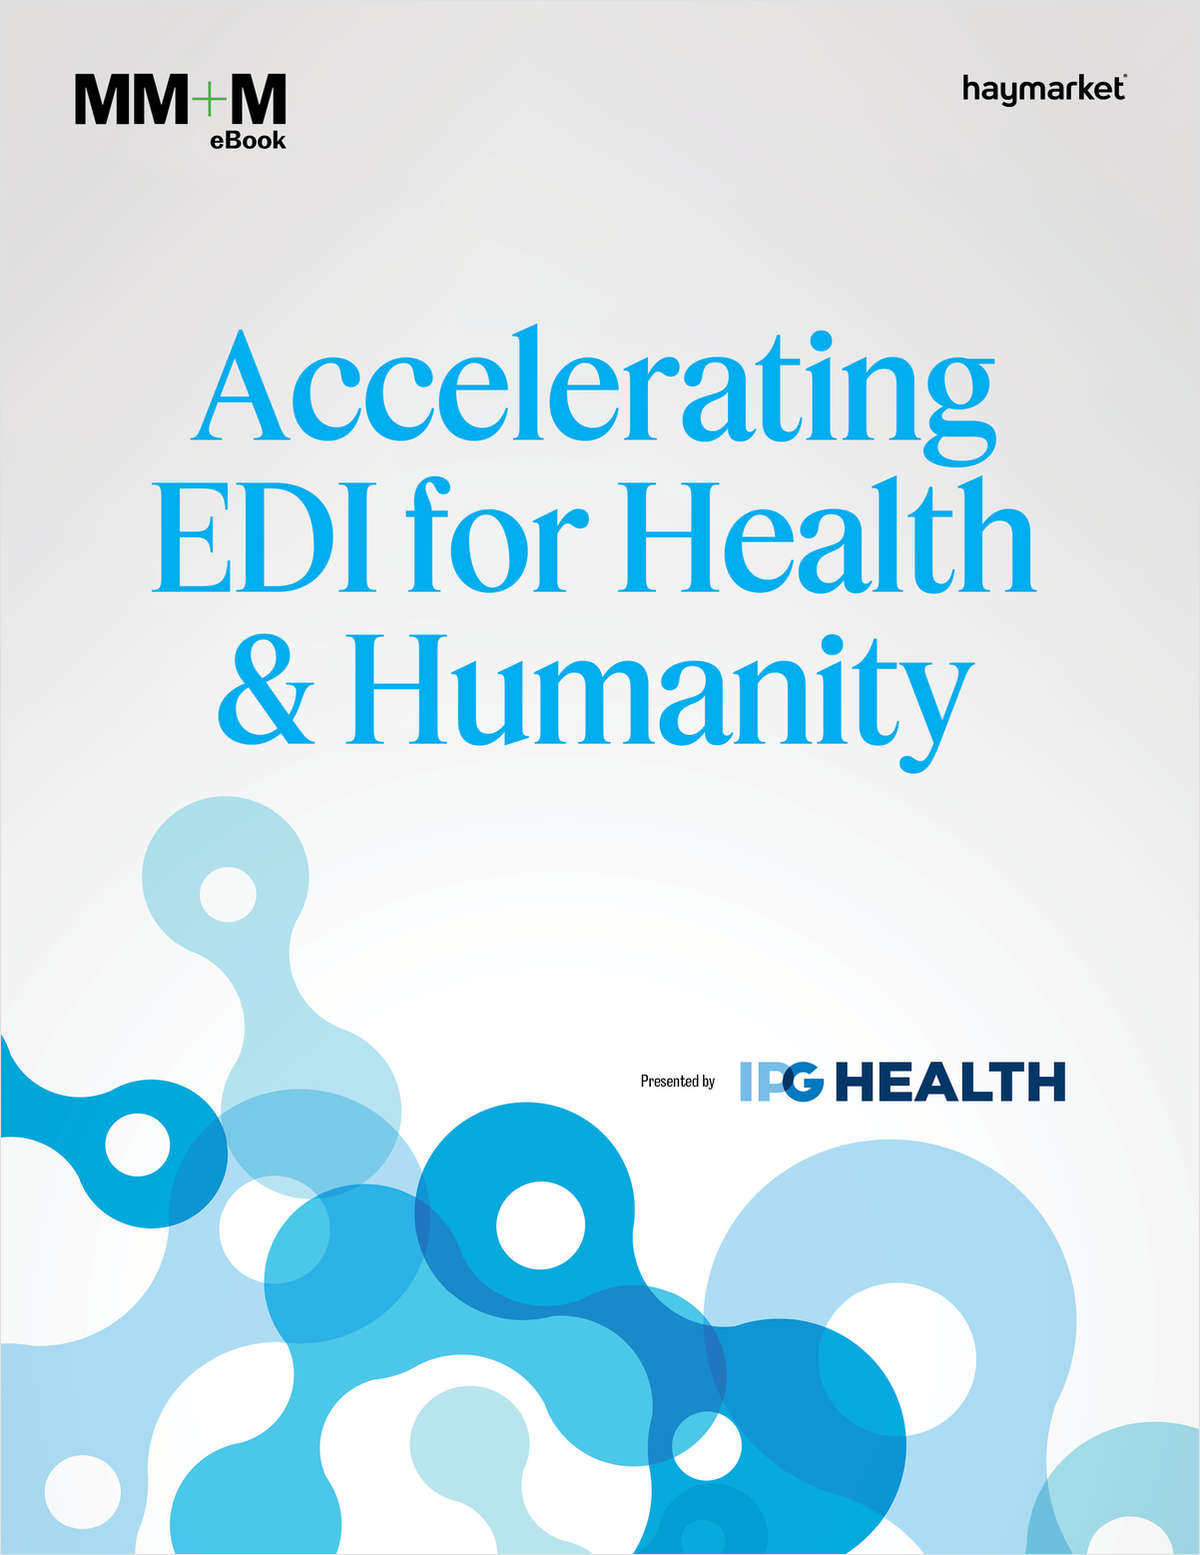 Accelerating EDI for Health & Humanity